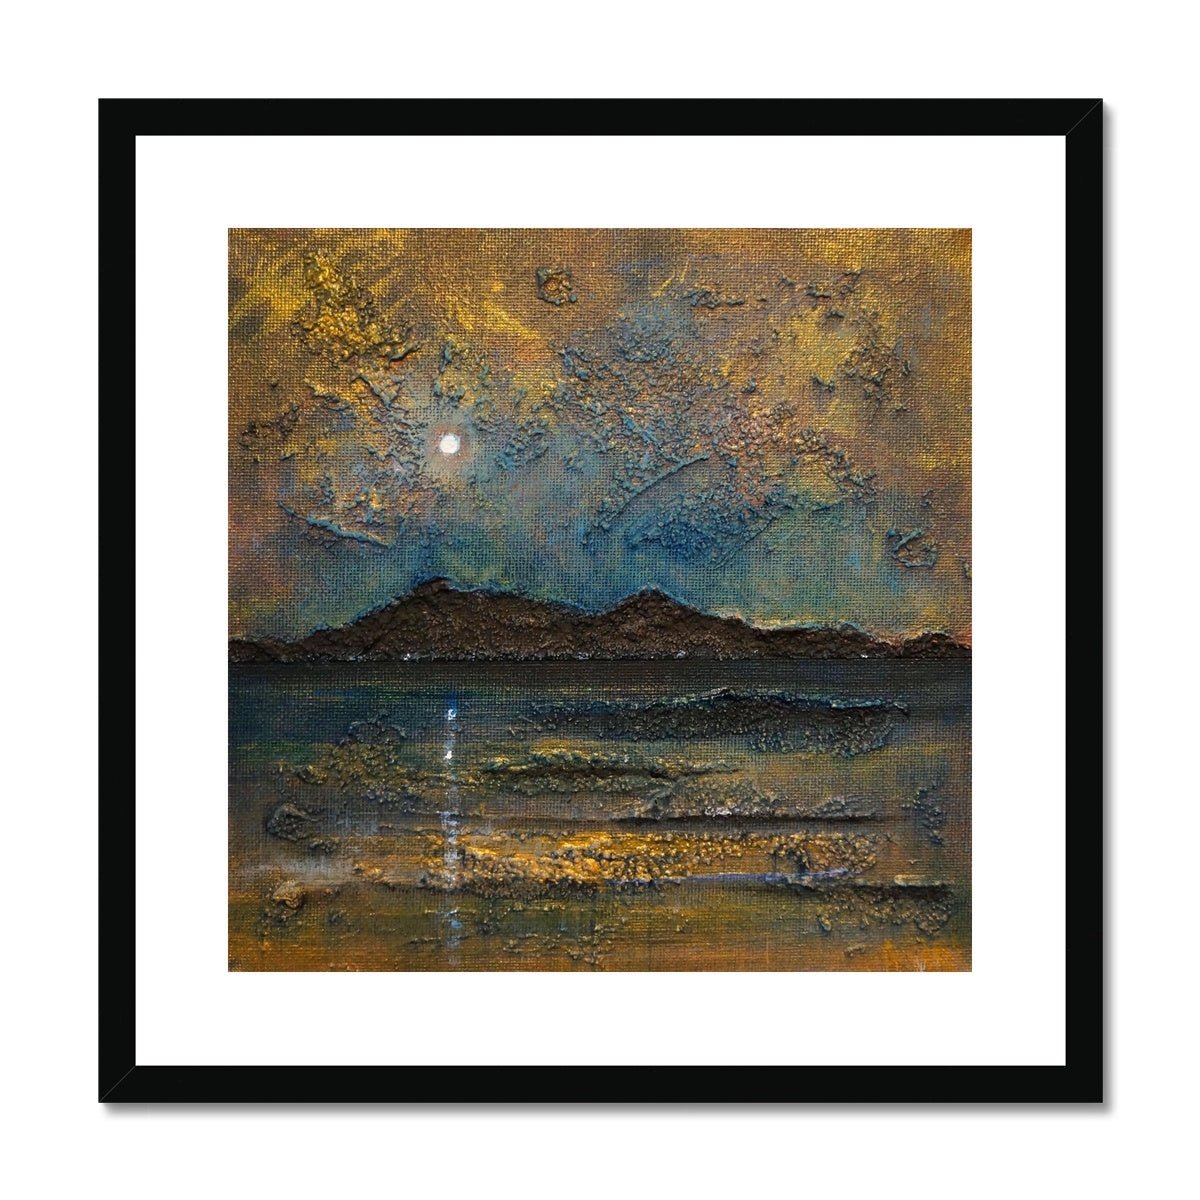 Arran Moonlight Painting | Framed & Mounted Prints From Scotland-Framed & Mounted Prints-Arran Art Gallery-20"x20"-Black Frame-Paintings, Prints, Homeware, Art Gifts From Scotland By Scottish Artist Kevin Hunter